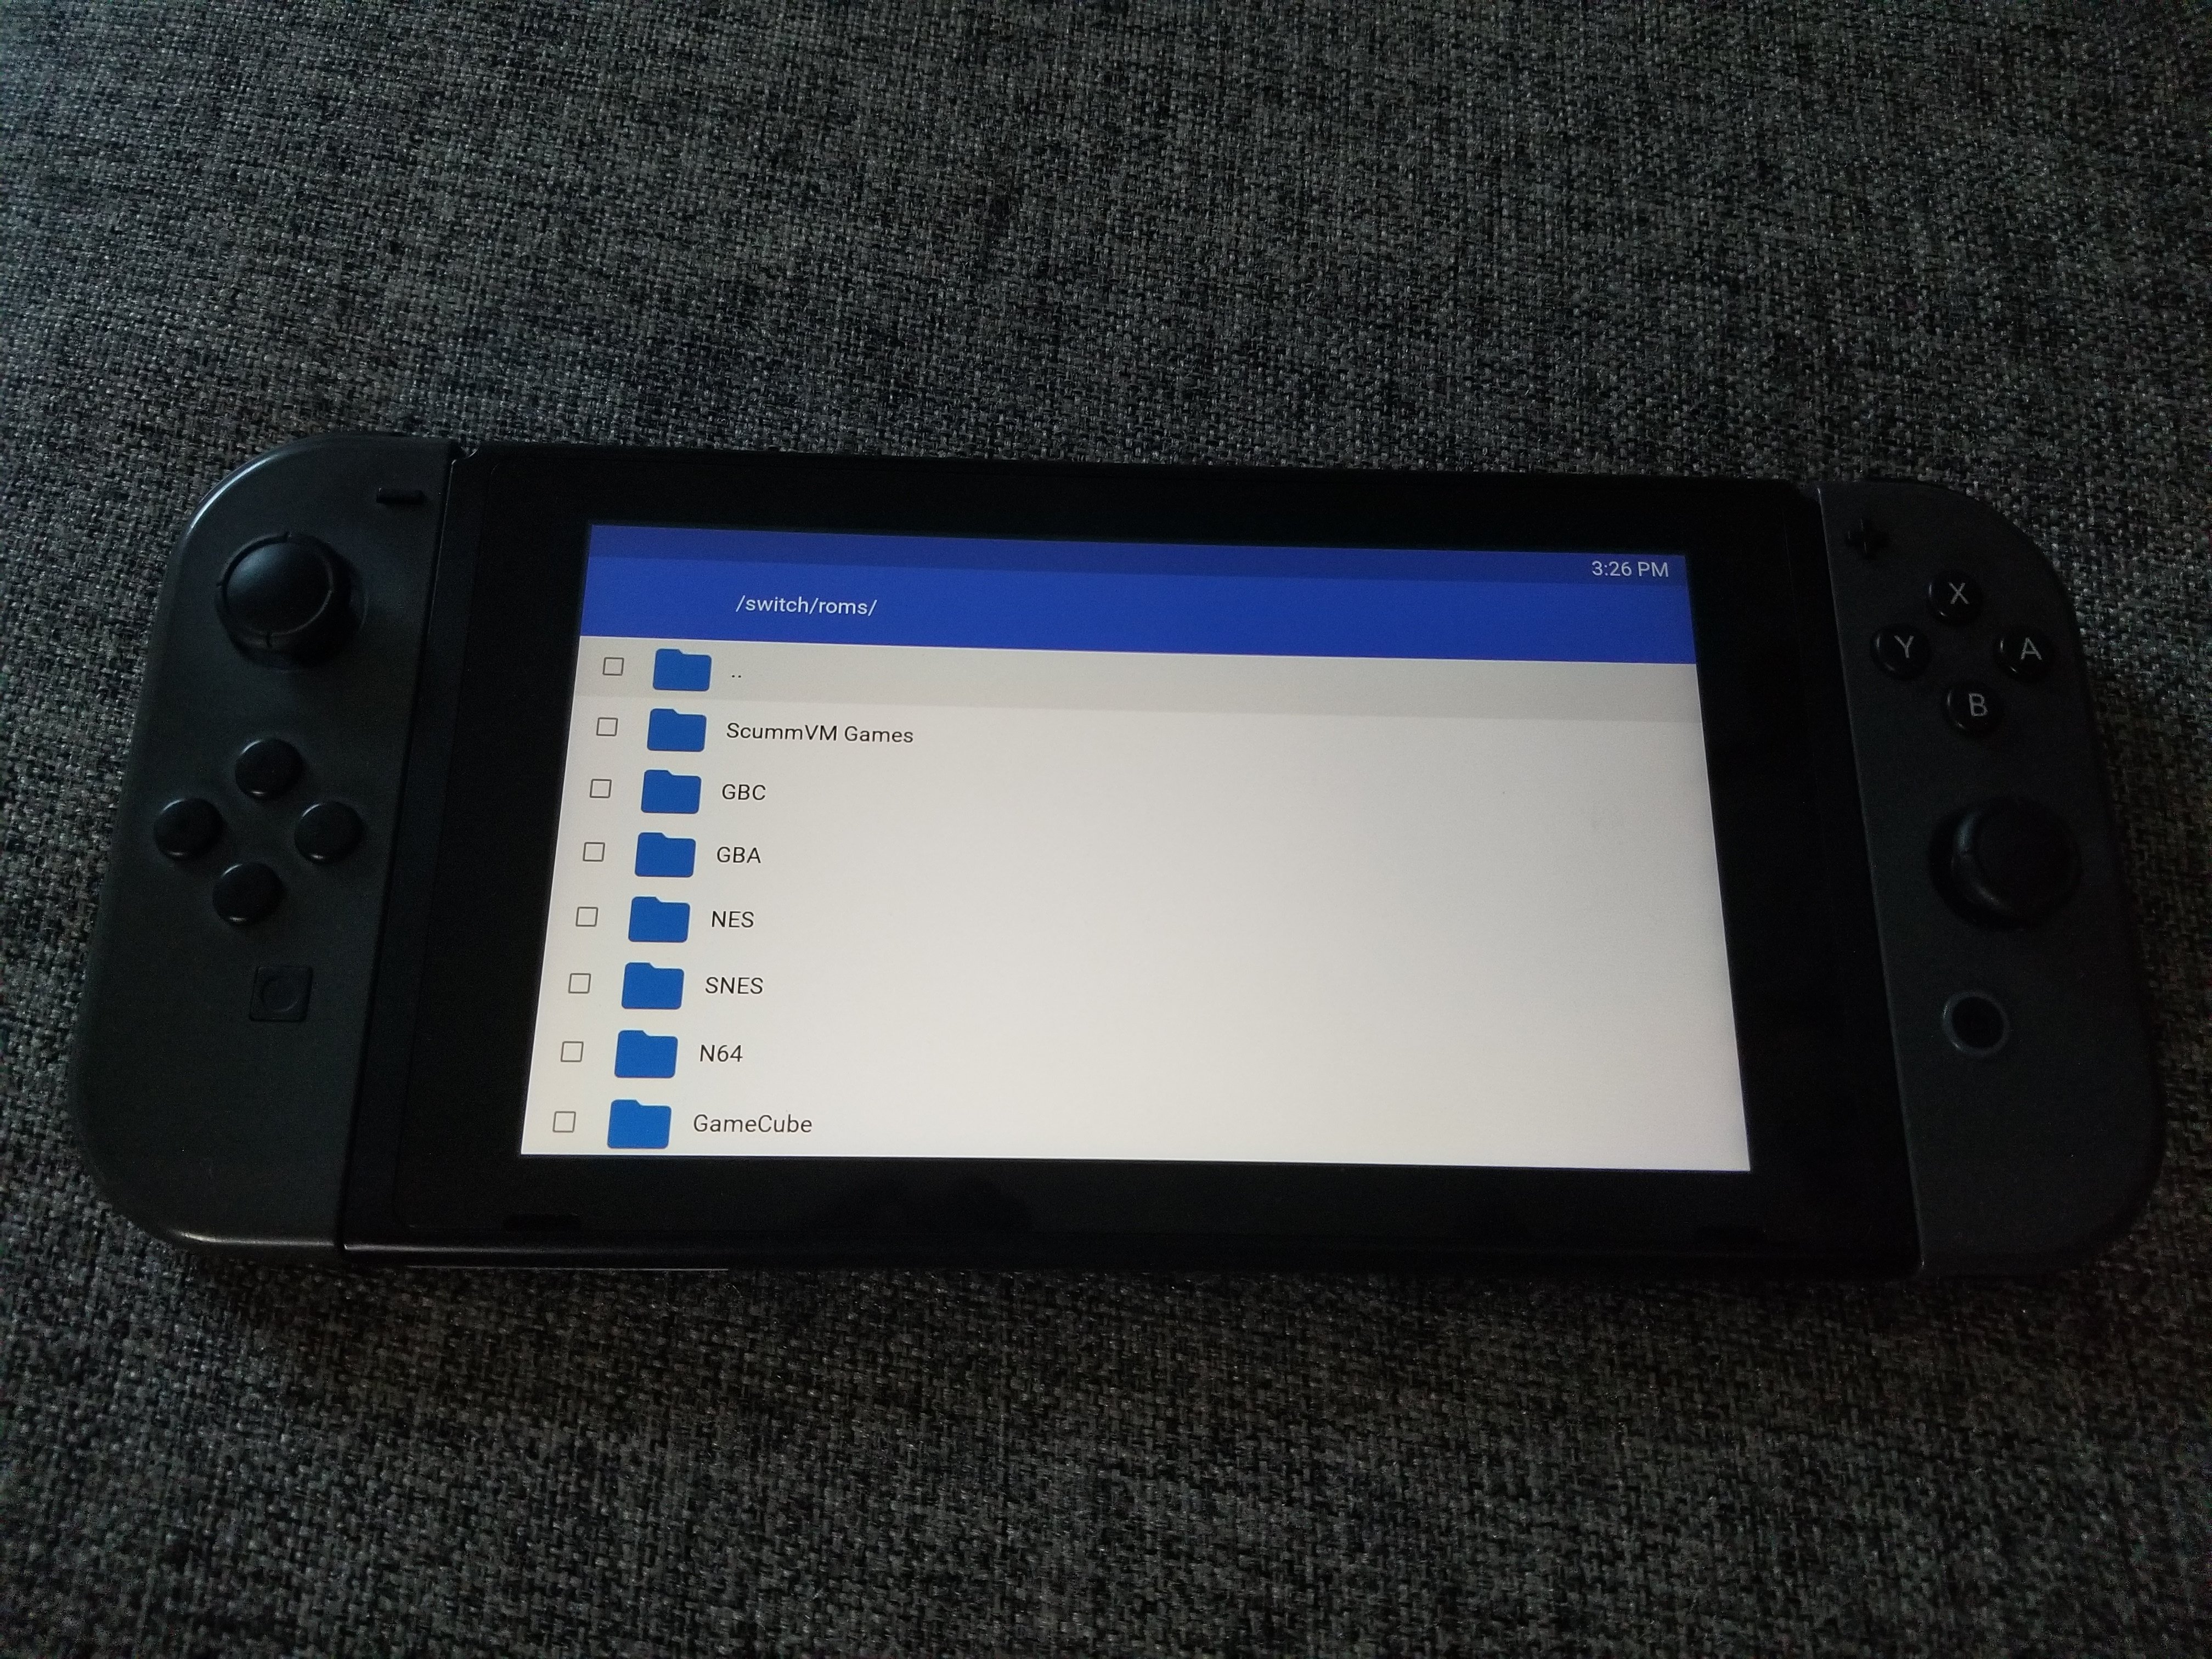 NX-Shell - Multipurpose File Manager for Nintendo Switch | GBAtemp.net -  The Independent Video Game Community